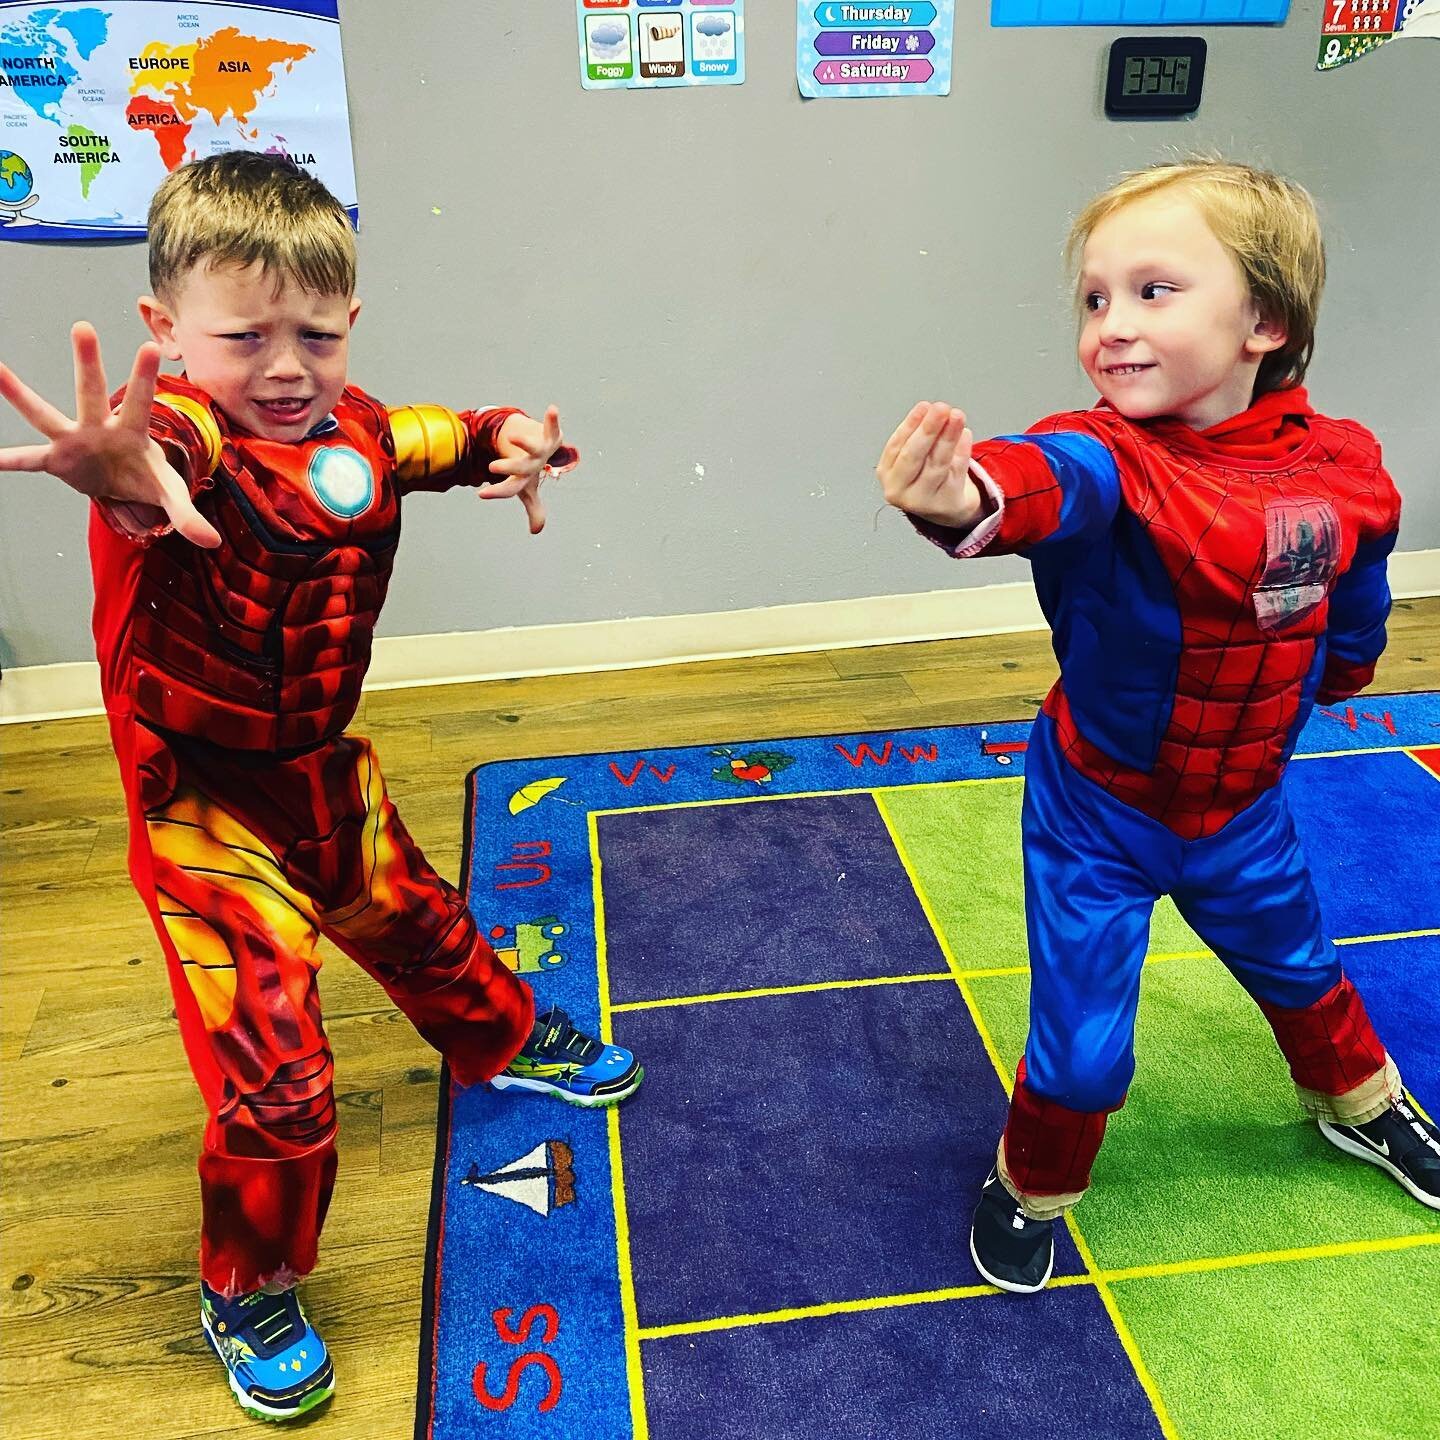 There&rsquo;s no report on the safety of the photographer, but what we do know is that iron man and spidey are IN THE BUILDING! @trinityprepdayschool #trinityprep #thetrinity #childcare #provider #kids #superhero #ironman #spiderman #friends #daycare